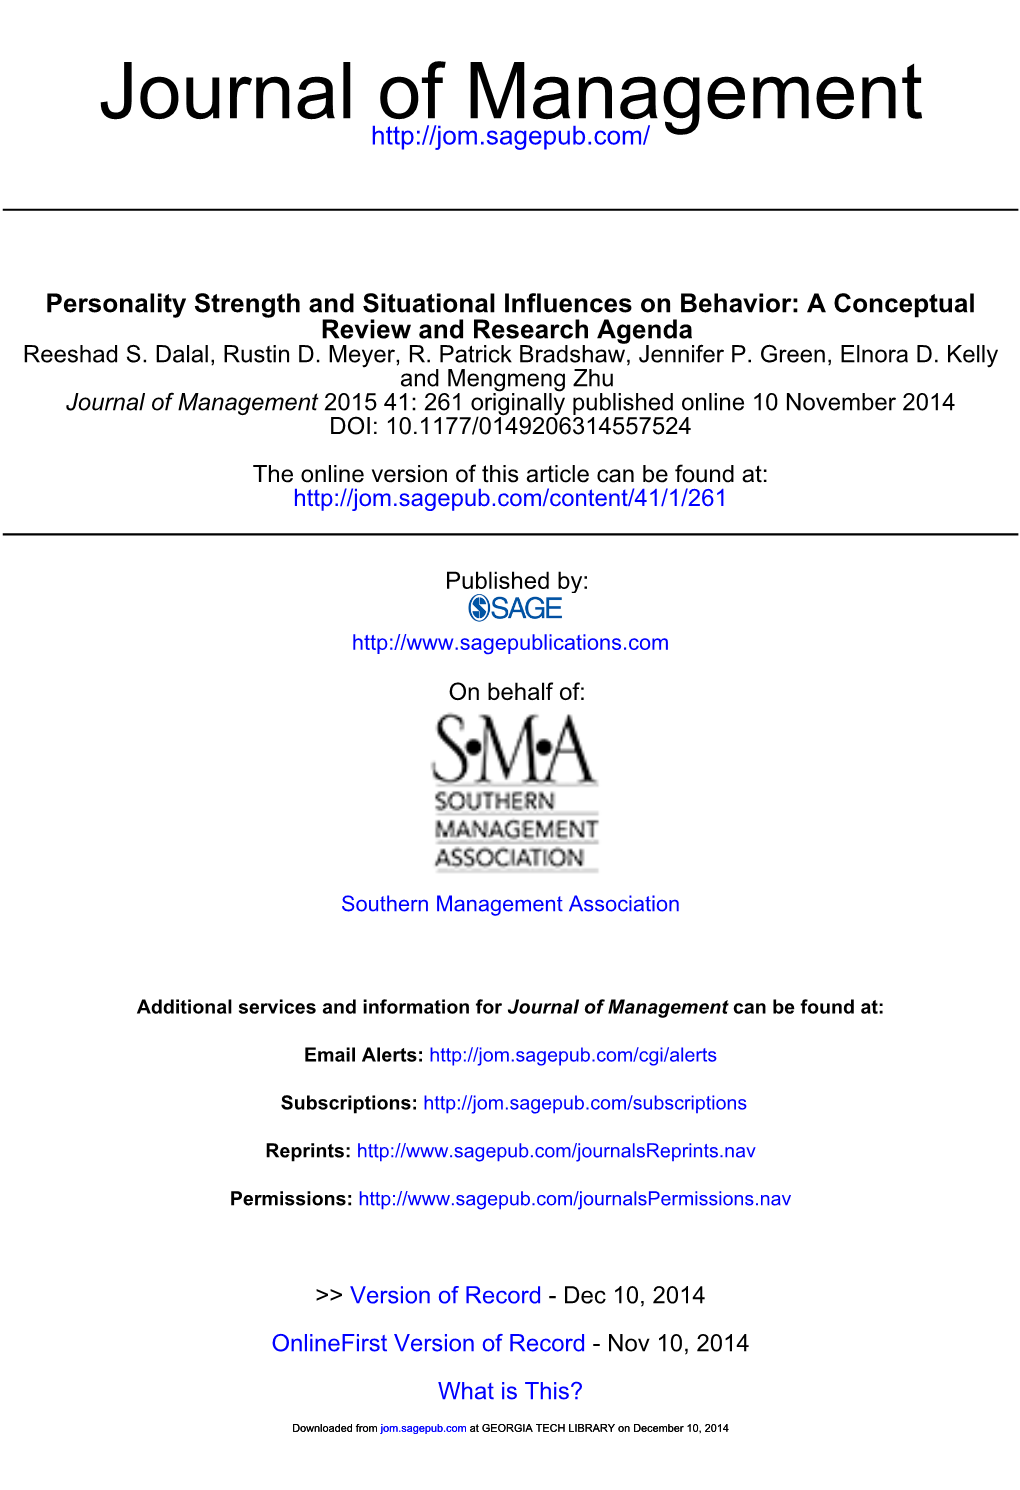 Personality Strength and Situational Influences on Behavior: a Conceptual Review and Research Agenda Reeshad S